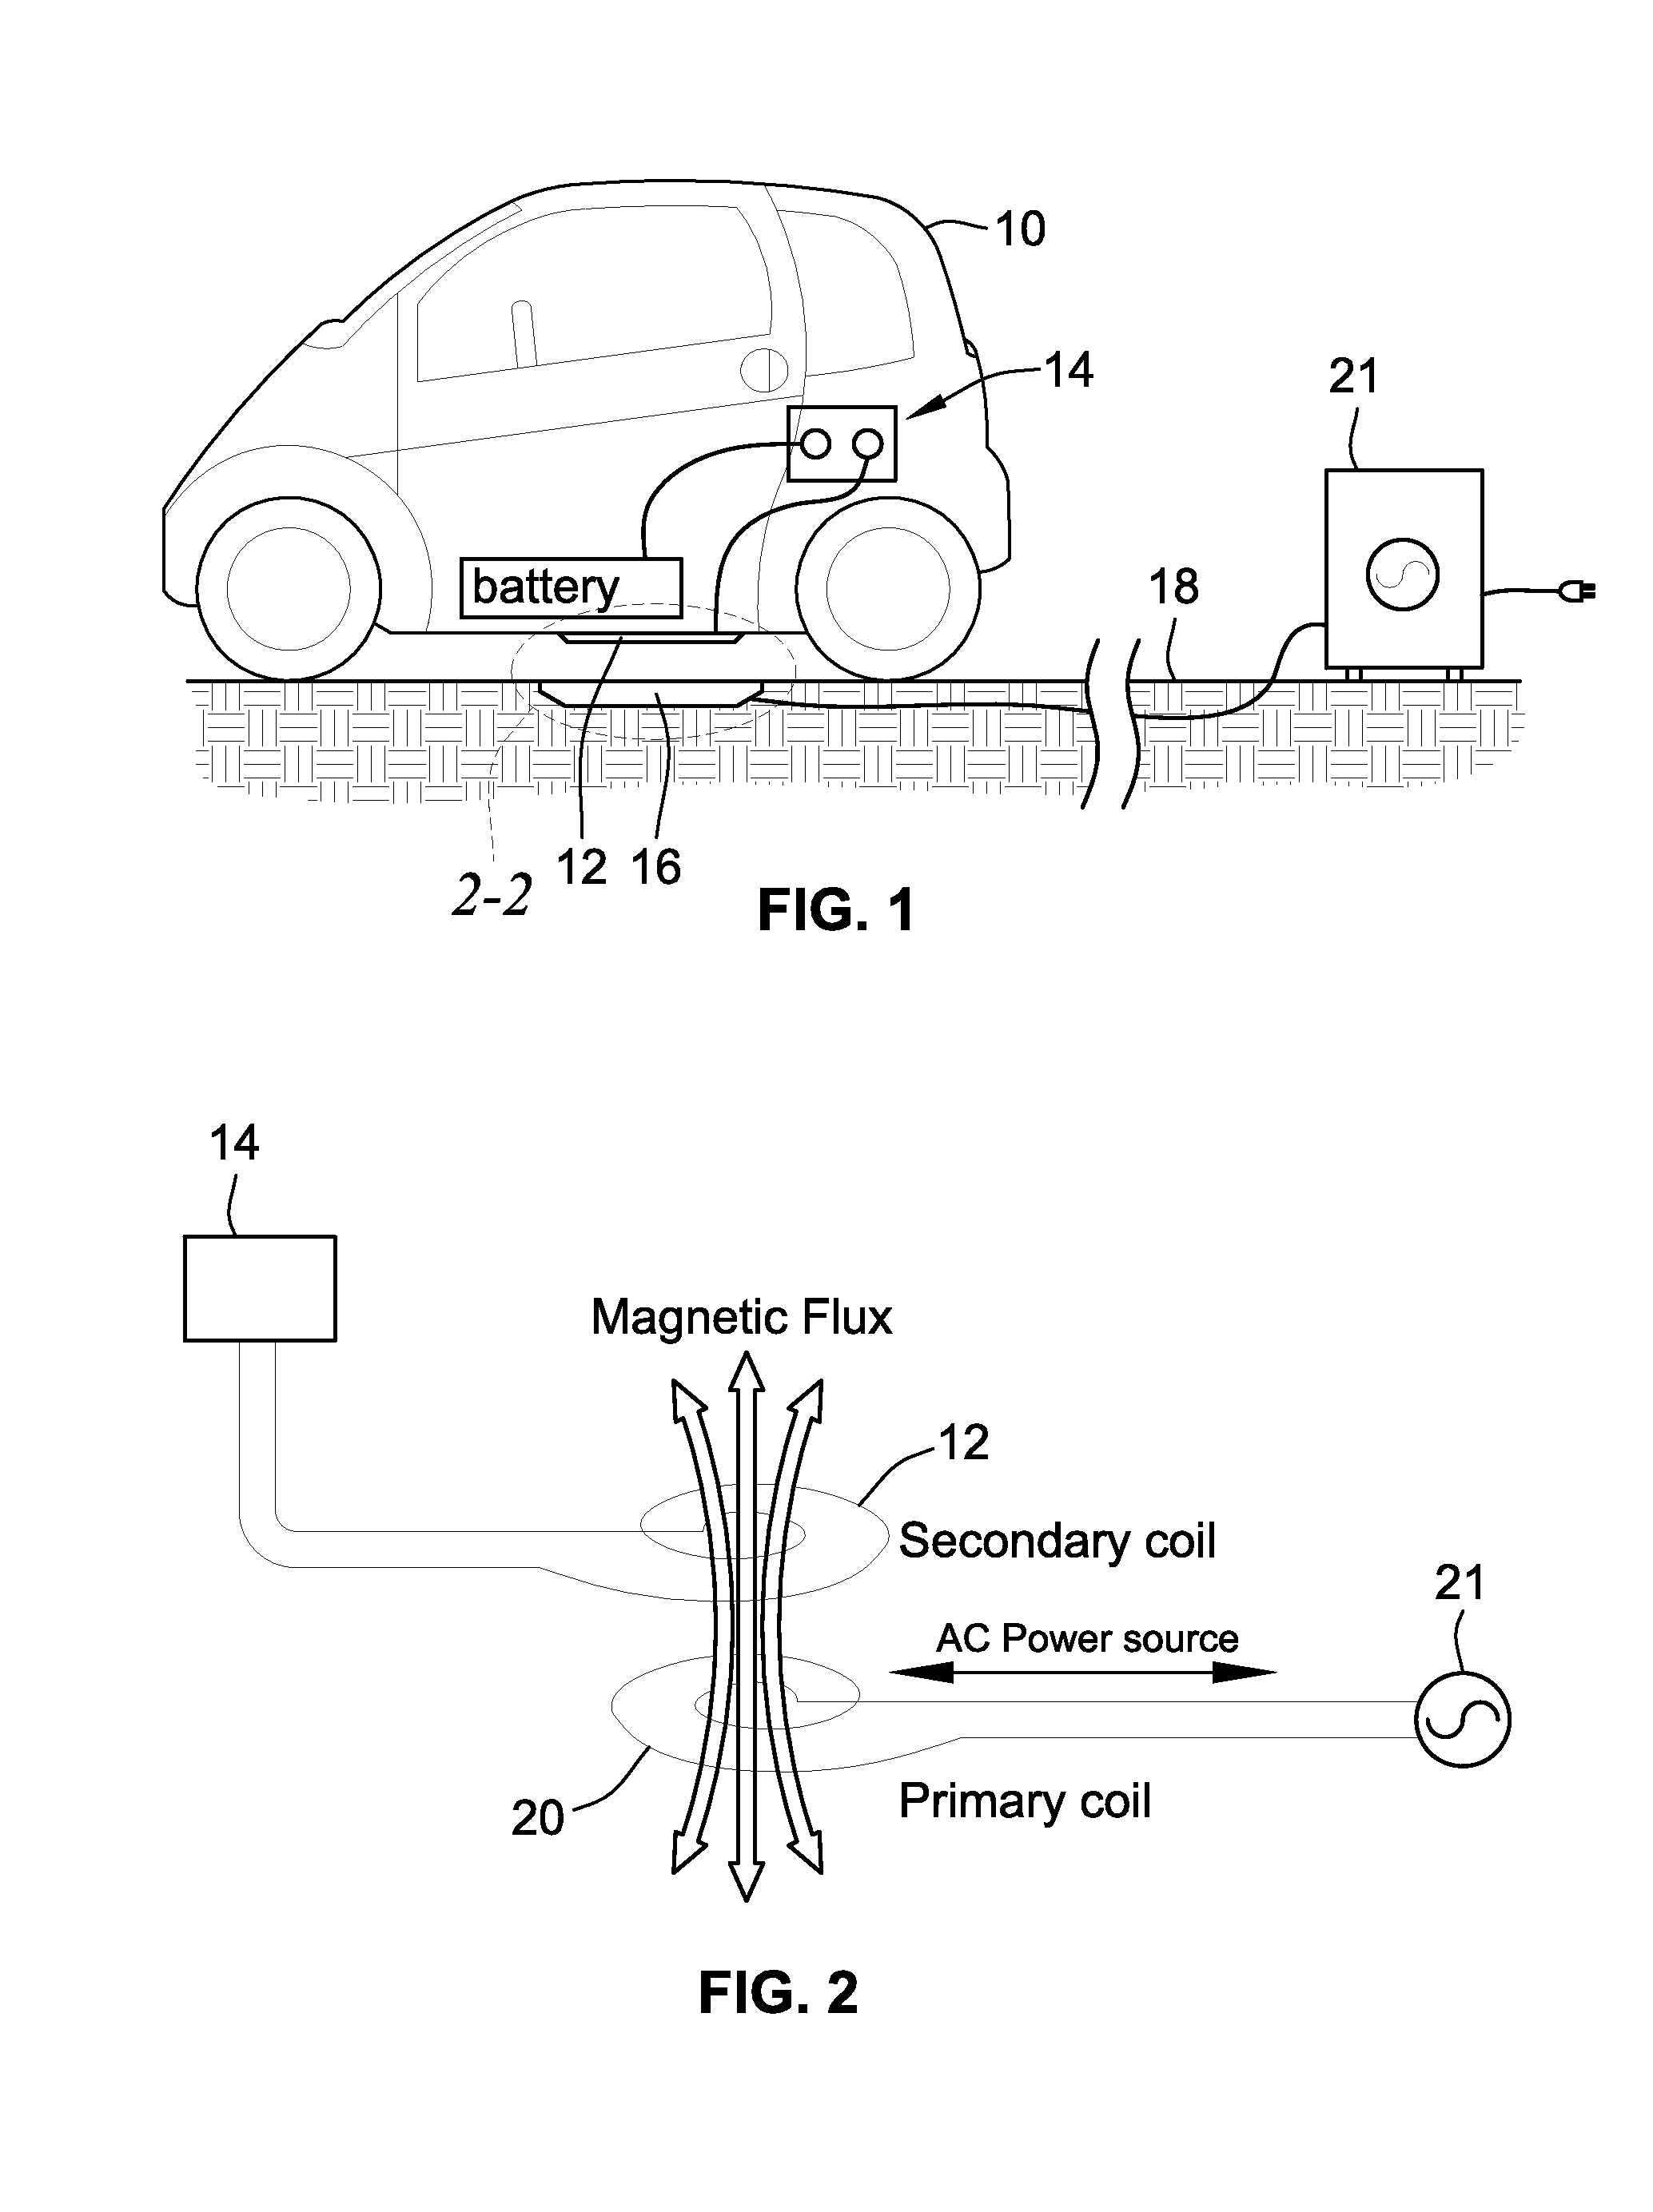 Extendable and deformable charging system